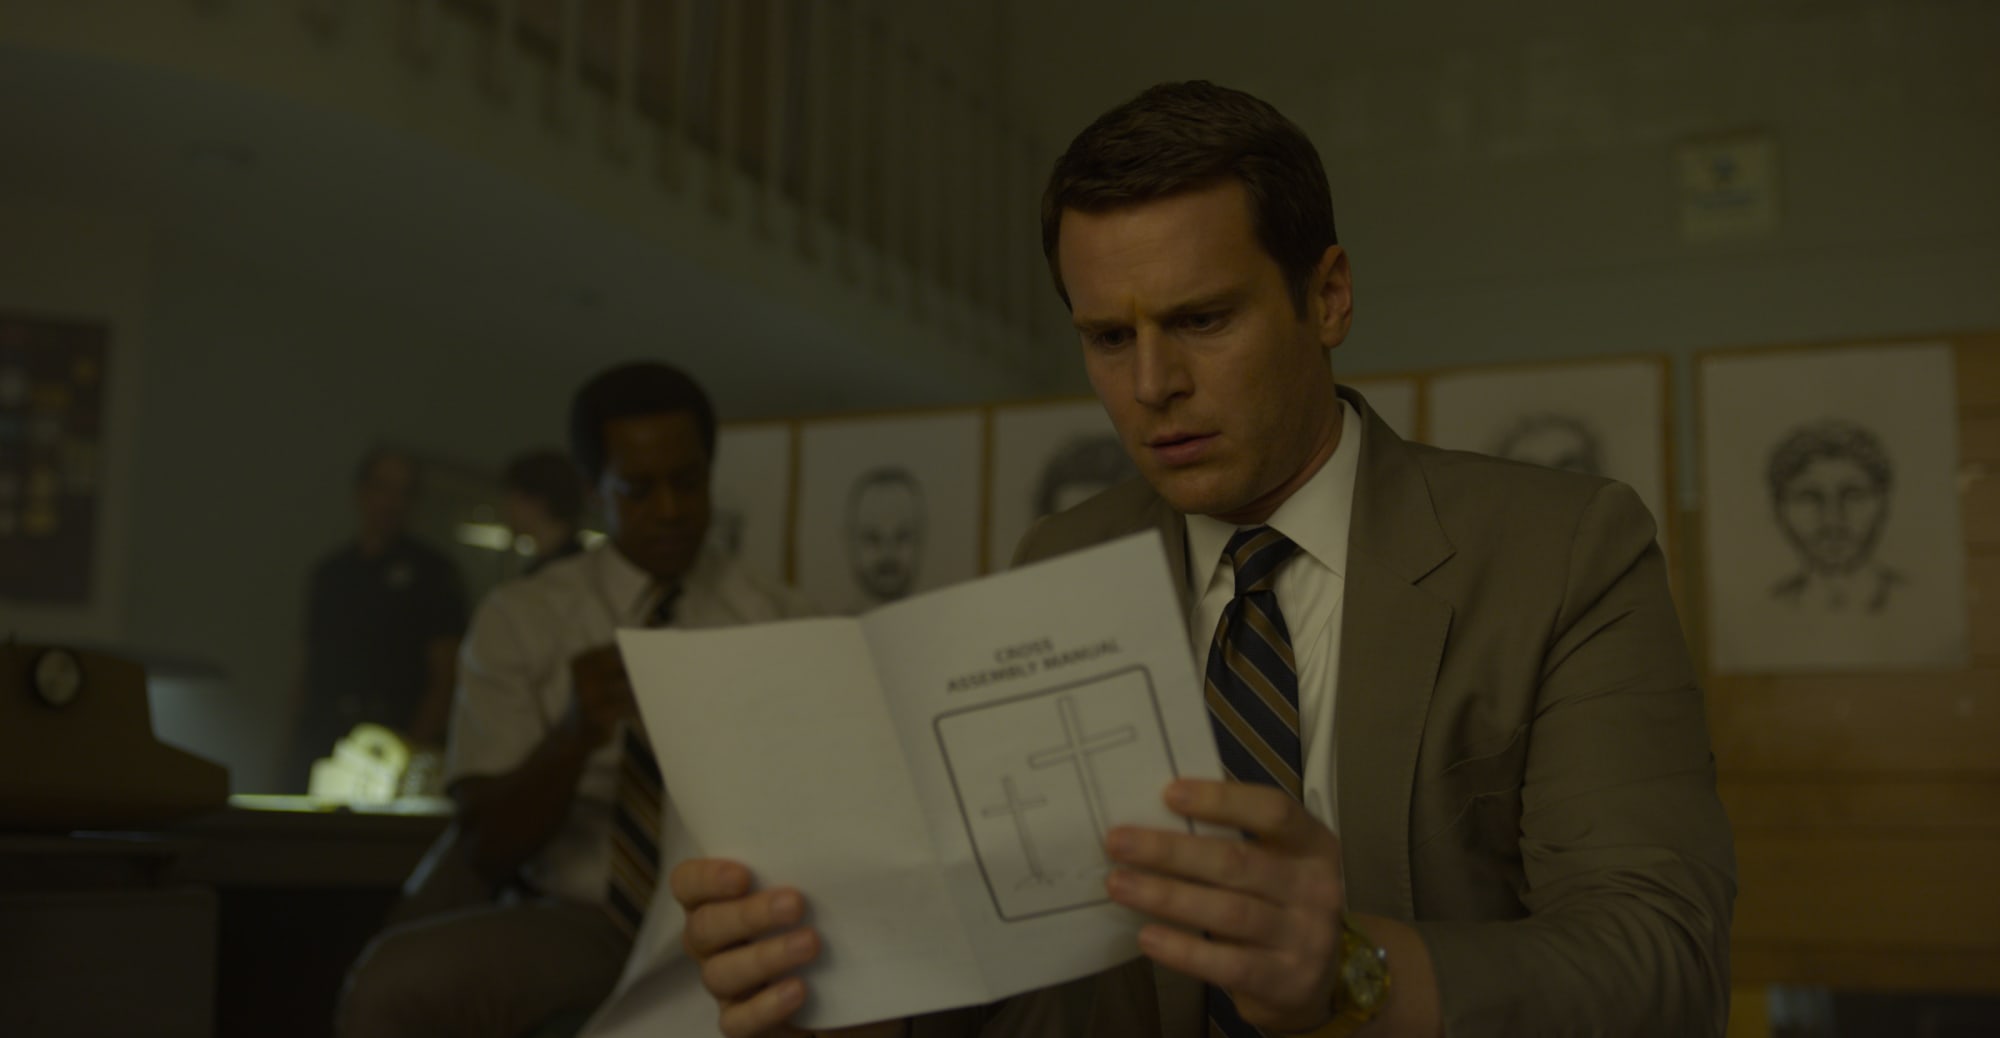 Mindhunter season 3 release date updates: Will there be a new season? When is it coming out?